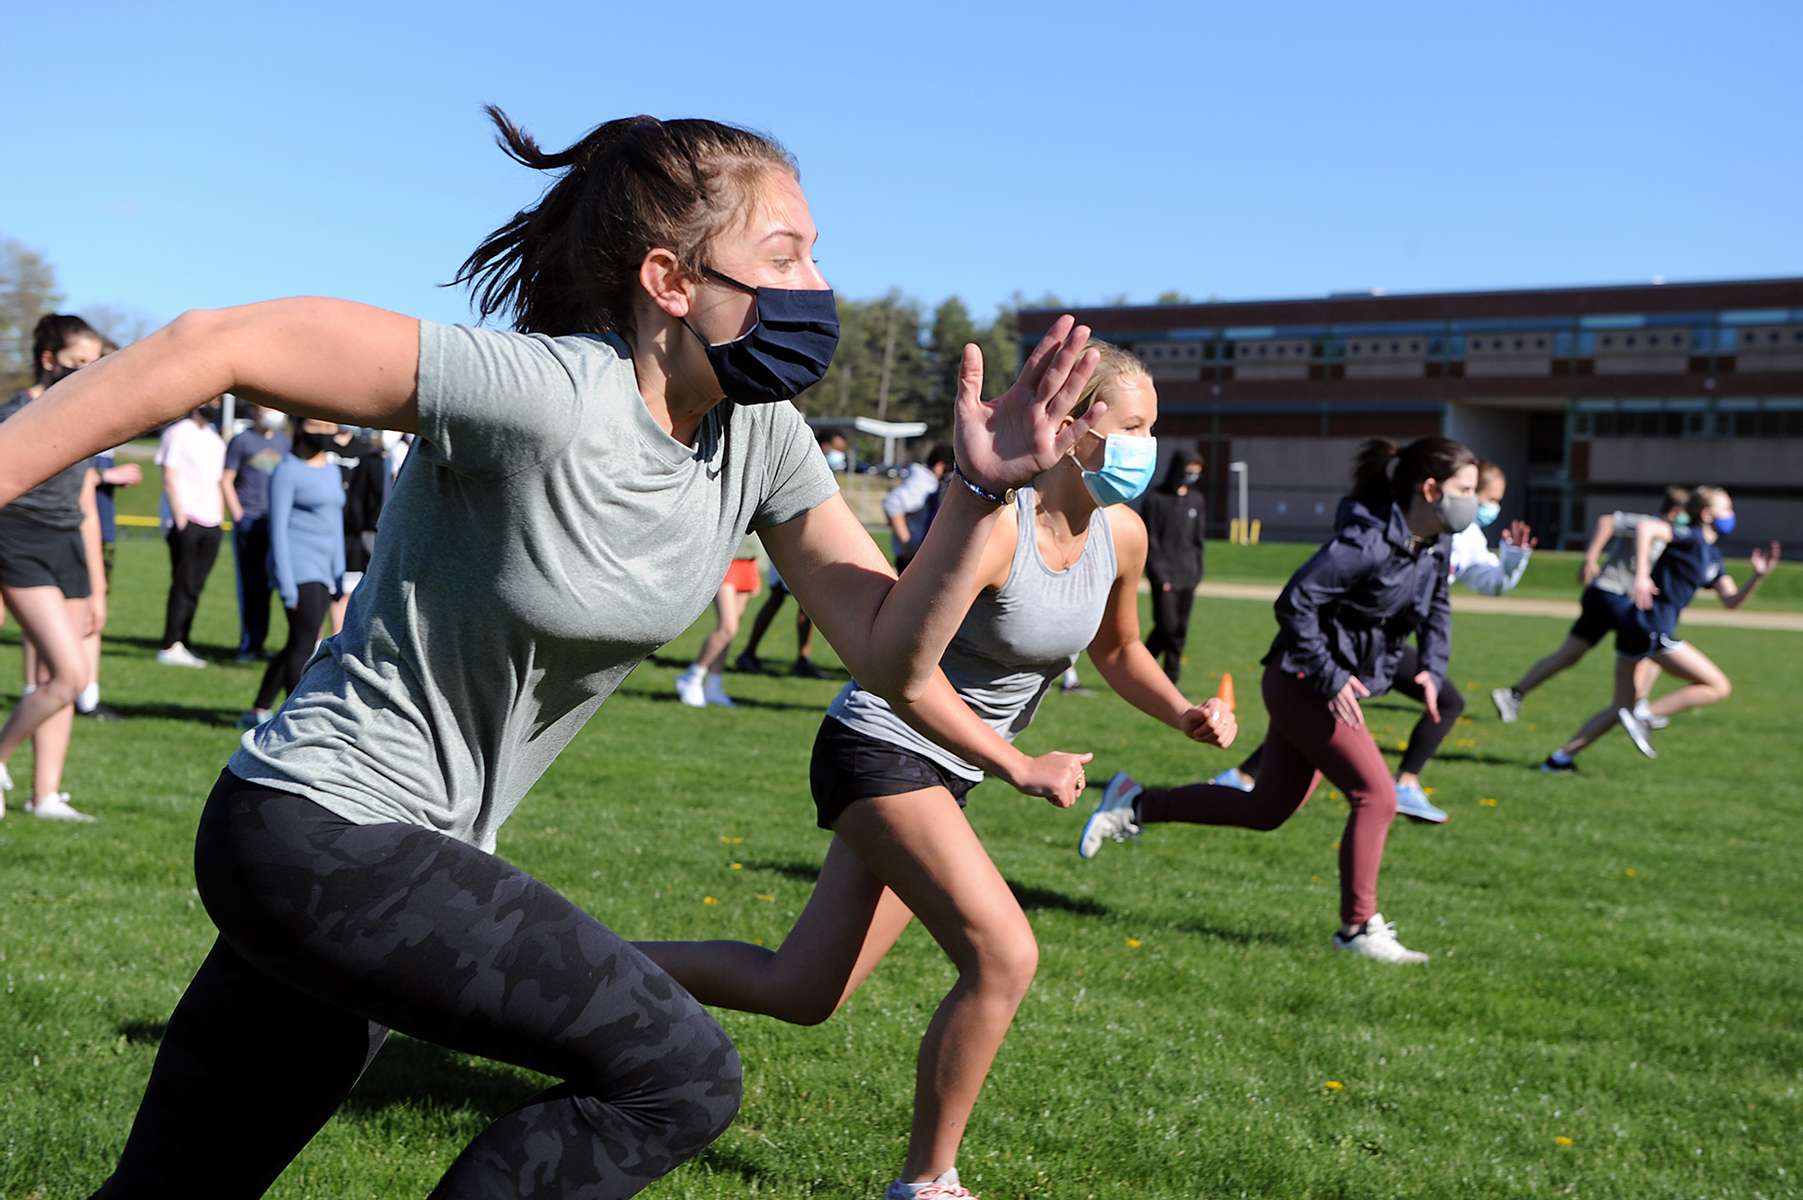 Lincoln-Sudbury Regional High School track team freshmen Katie Drew, left, and Amber Stubblebine run sprints on the first day of spring practice, April 26, 2021.